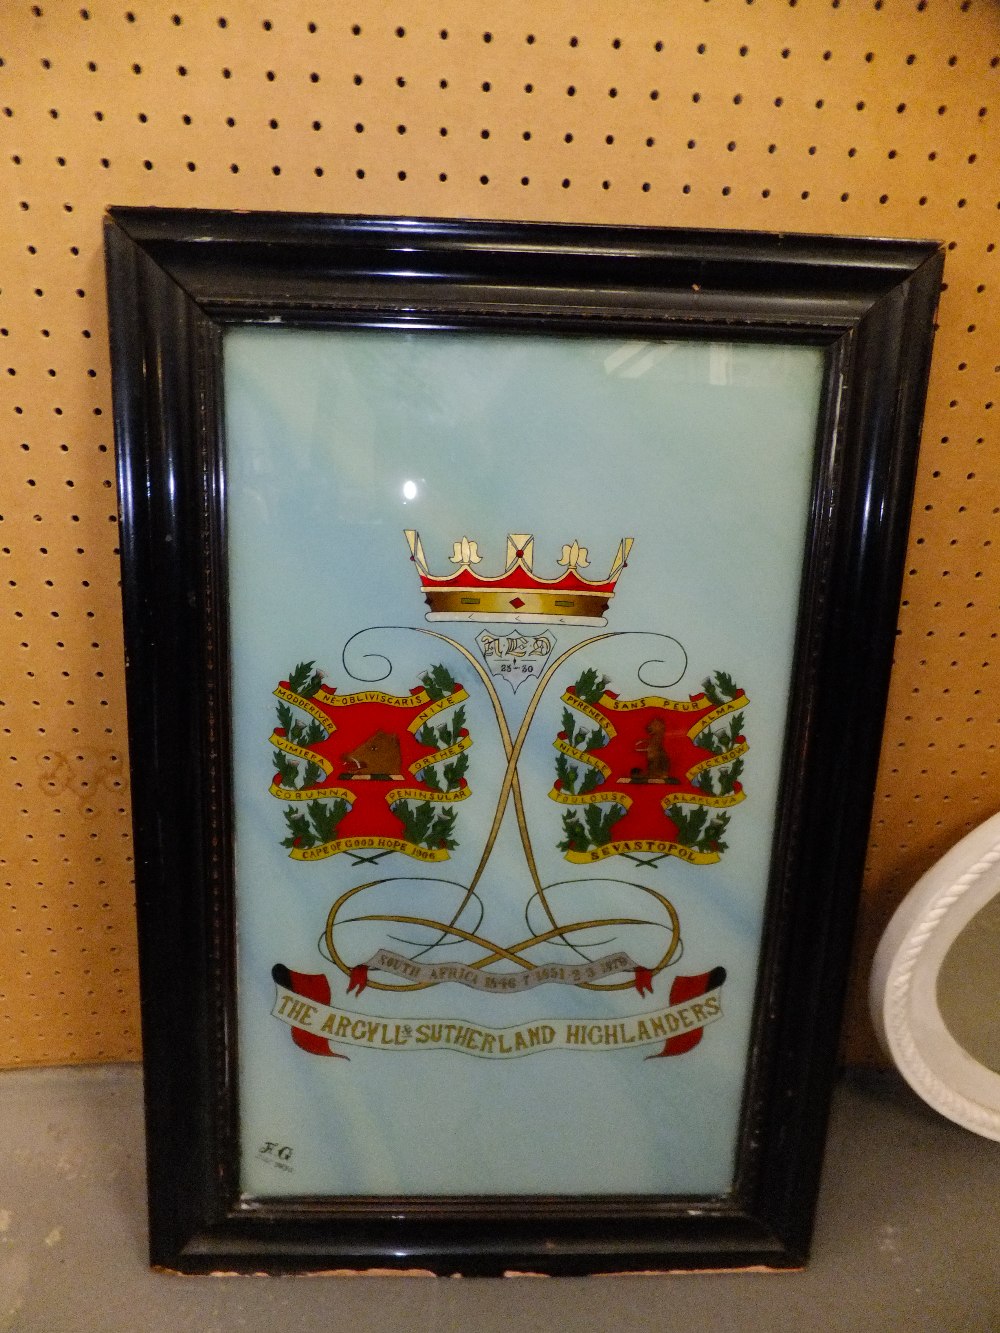 A 1930's hand painted Sutherland and Argyle Highlanders picture on glass, framed